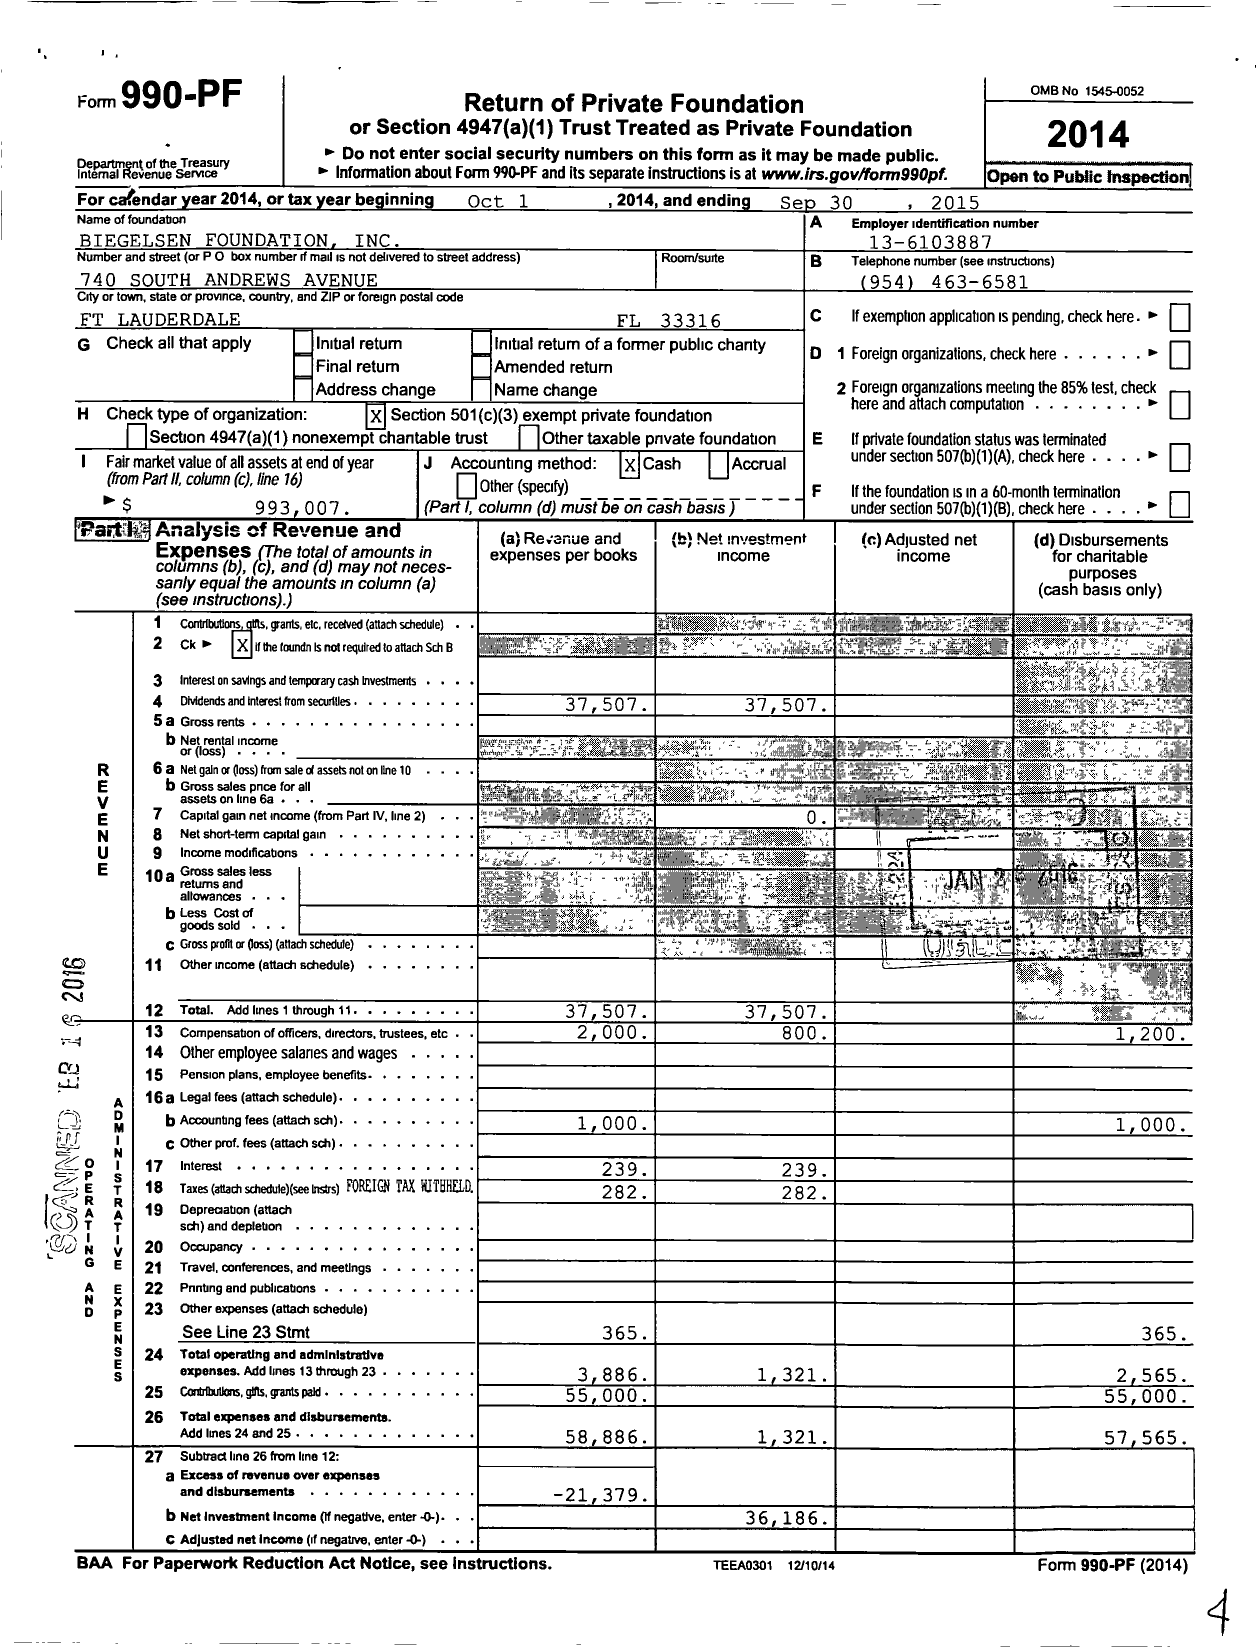 Image of first page of 2014 Form 990PF for Biegelsen Foundation